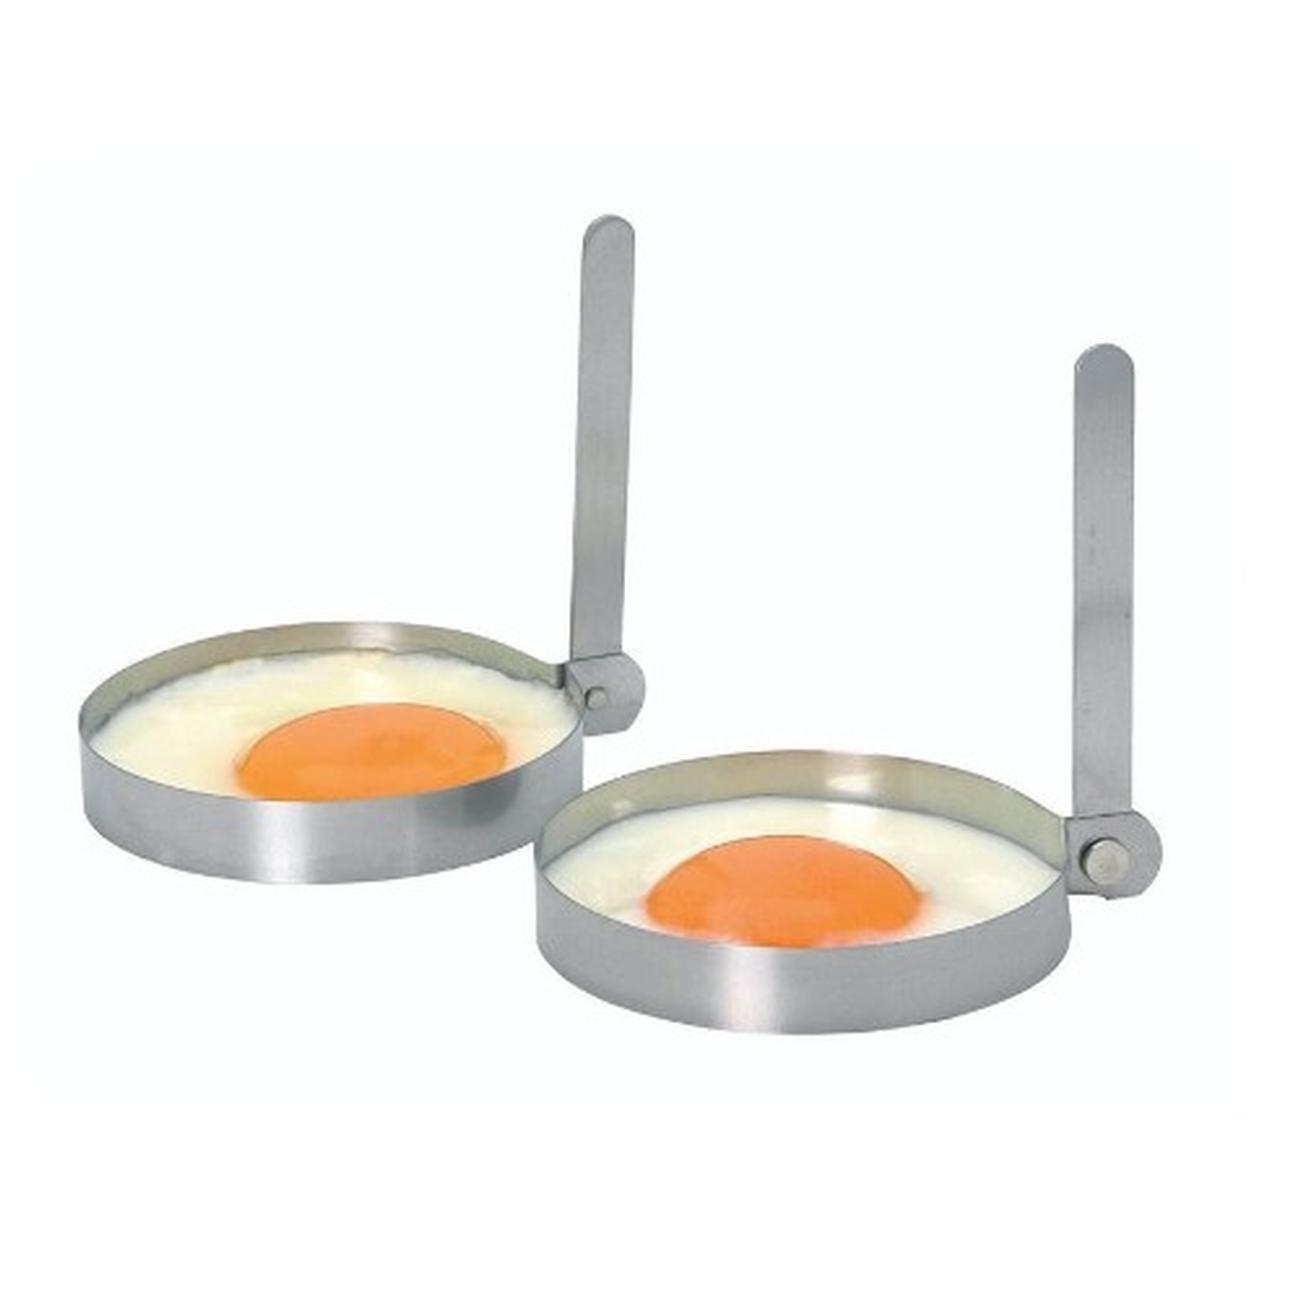 kitchencraft-2pc-egg-rings-stainless-steel - KitchenCraft Set of 2 Stainless Steel Eggs Rings